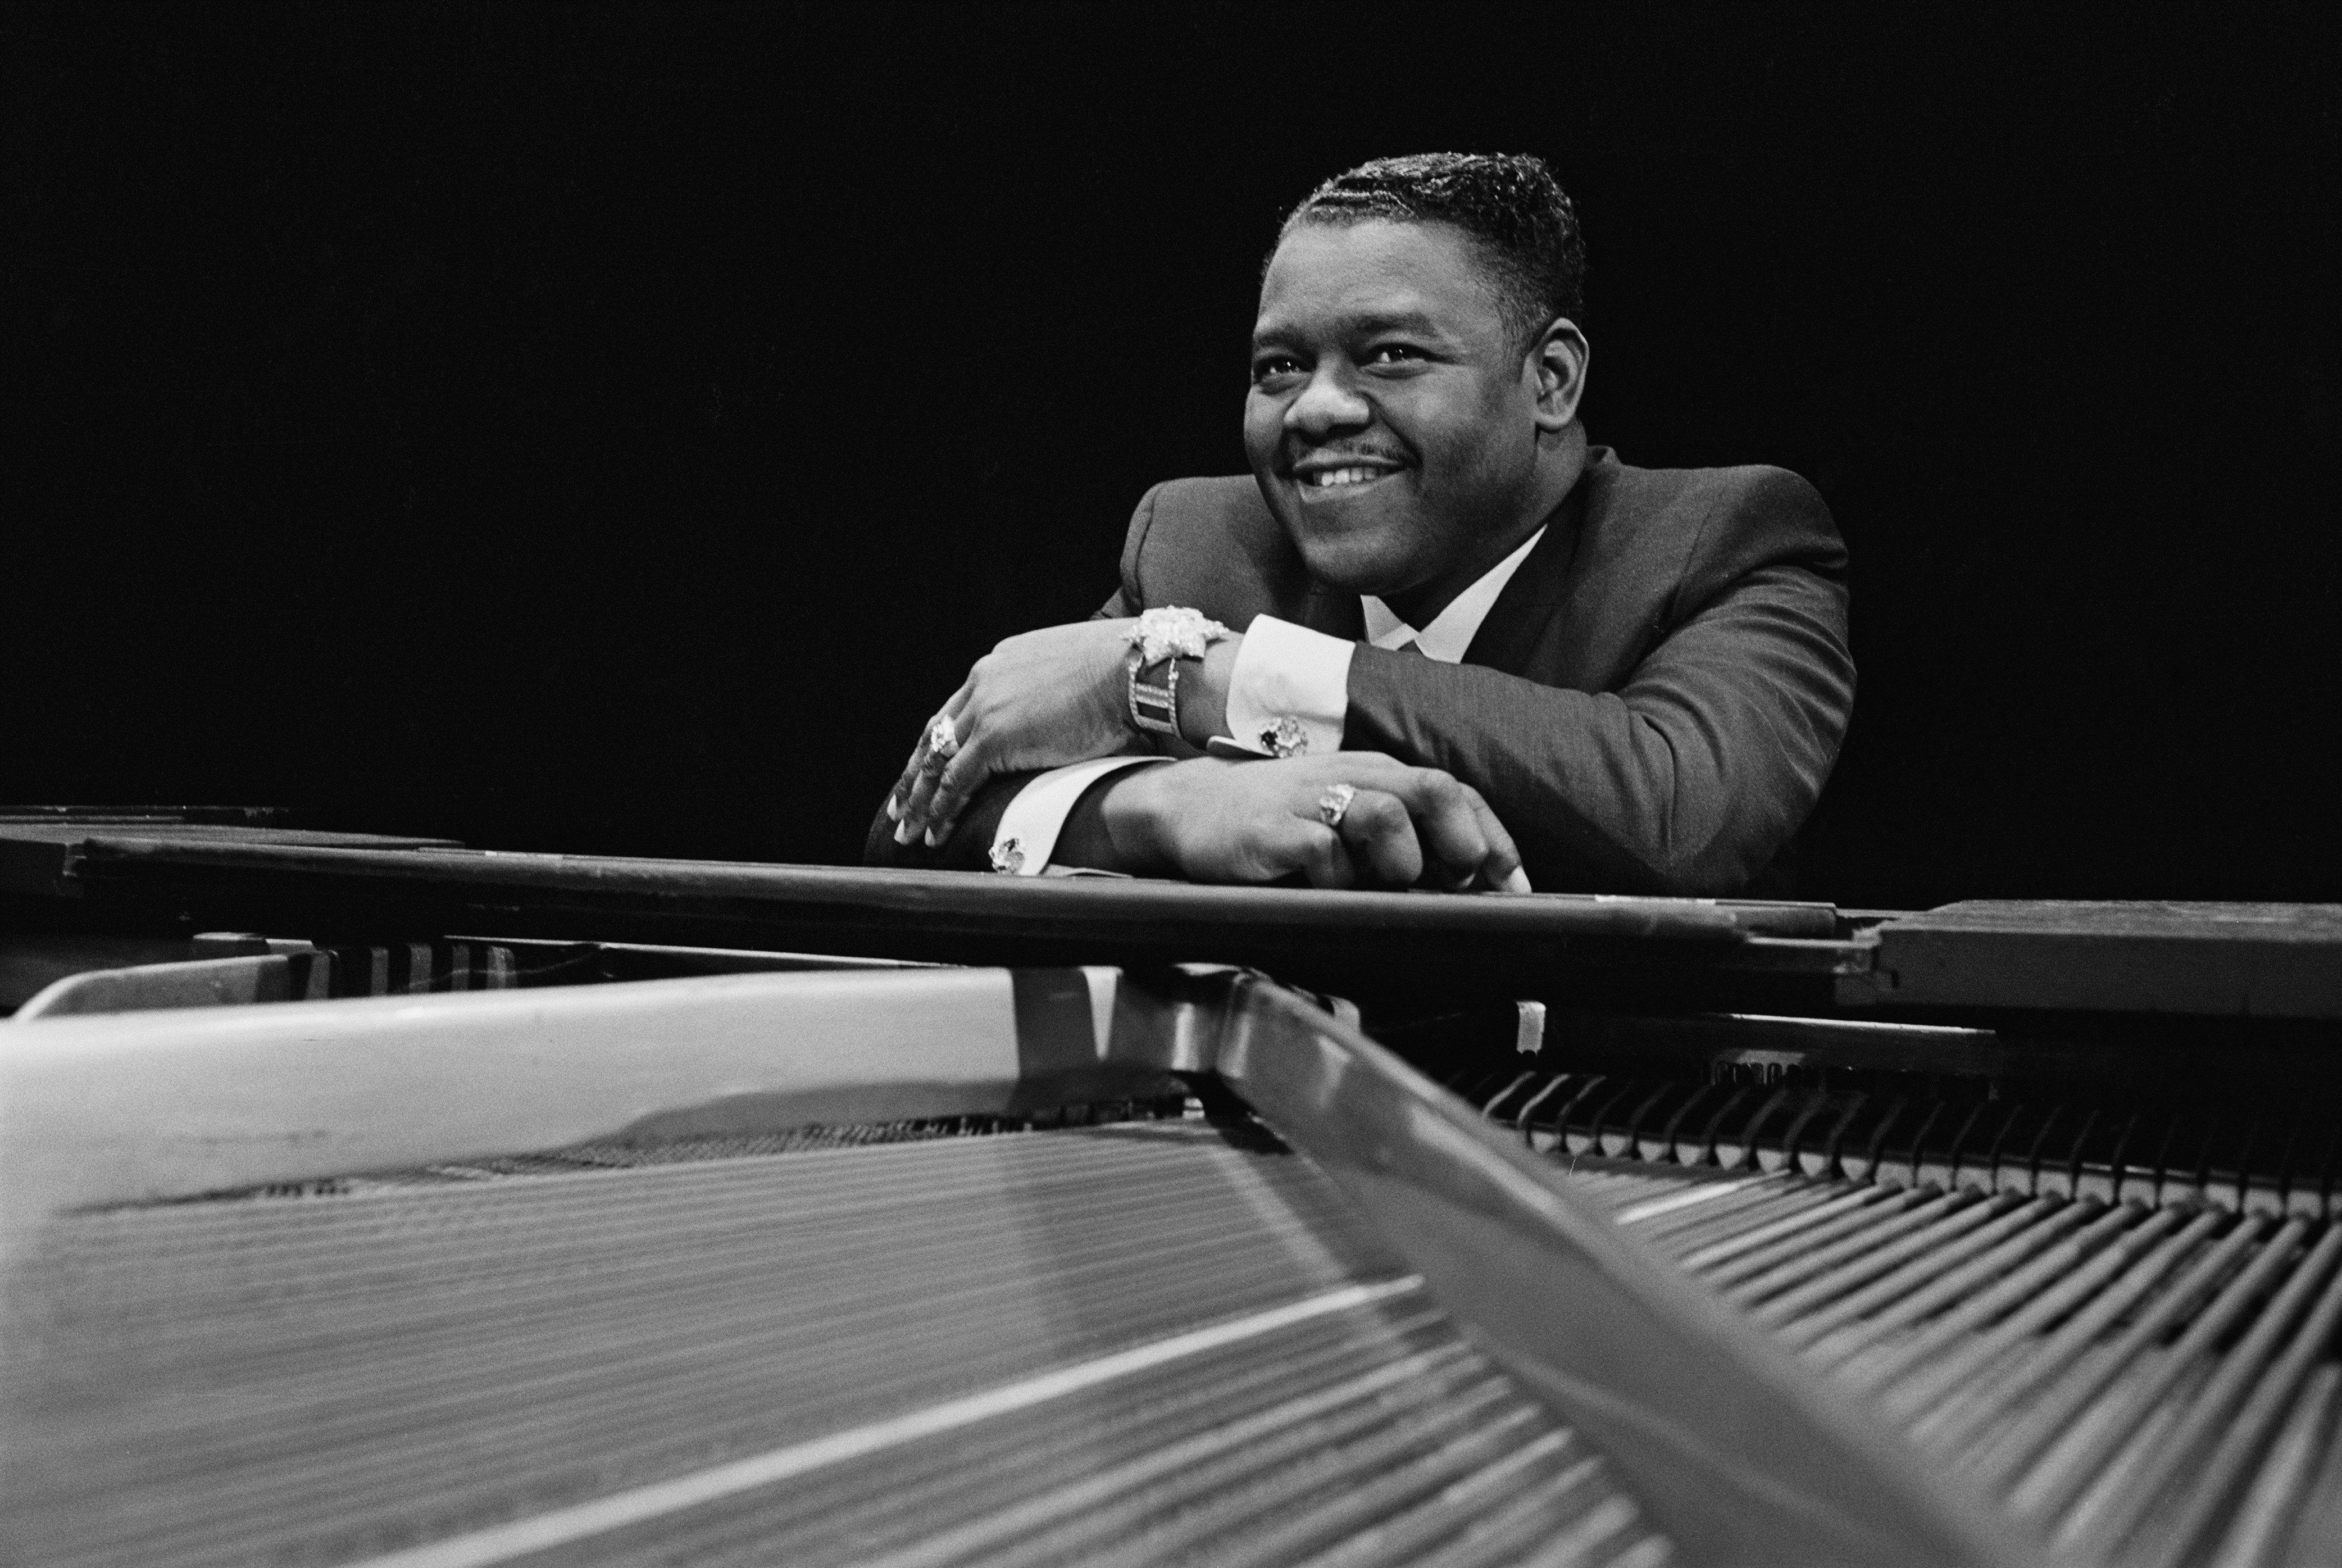 Fats Domino photographed at the piano